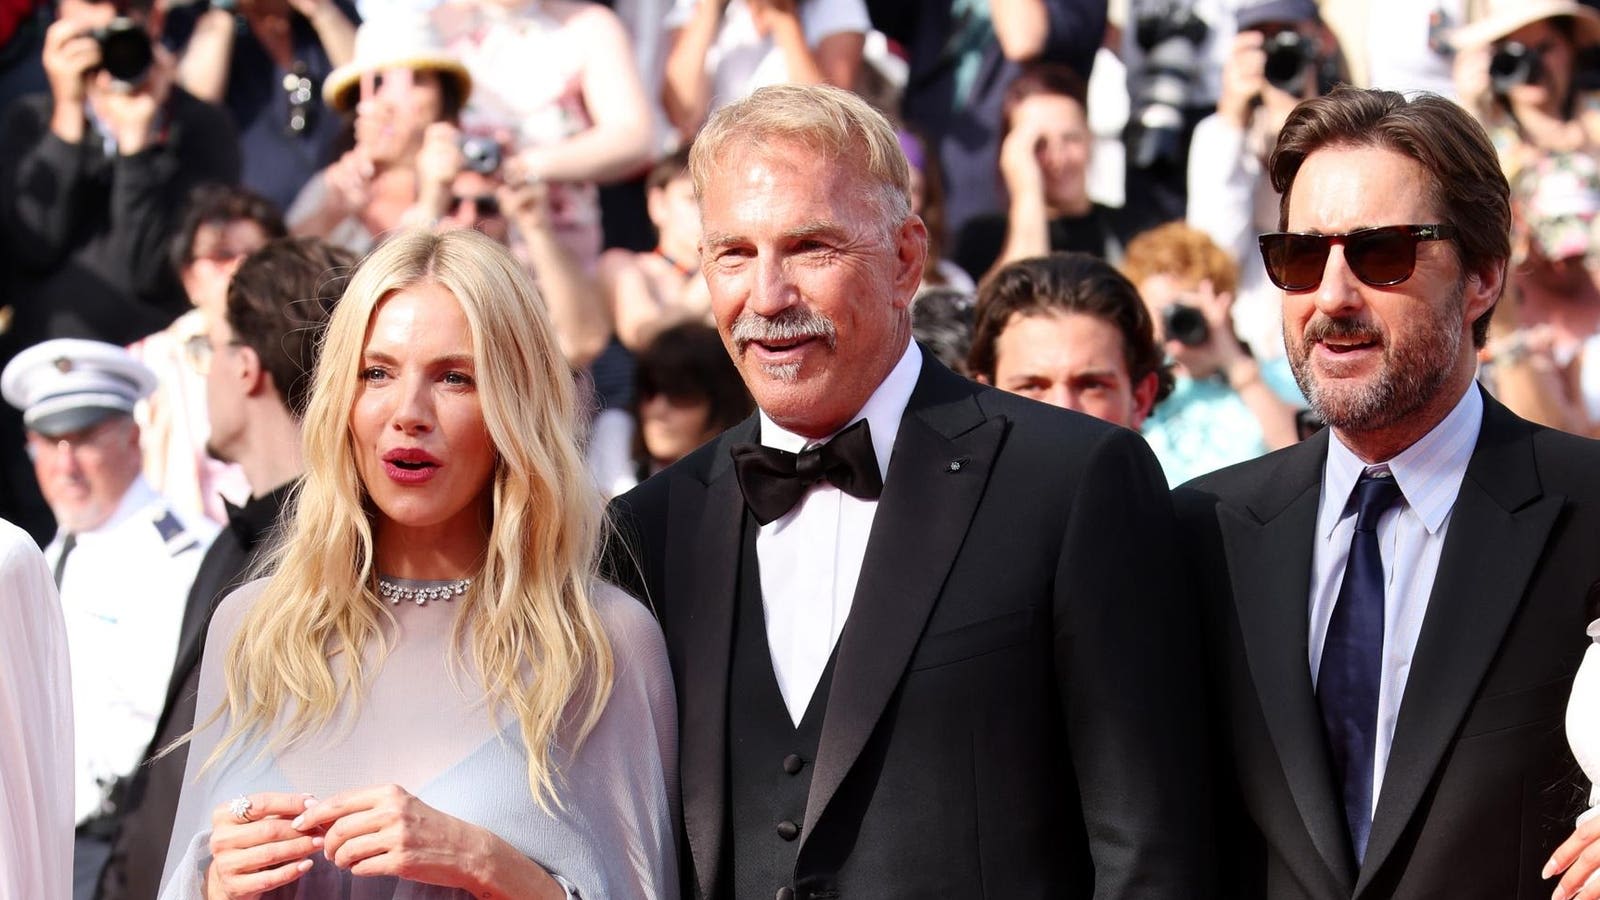 ‘Horizon’: Kevin Costner And Sienna Miller Among Stars On Cannes Red Carpet